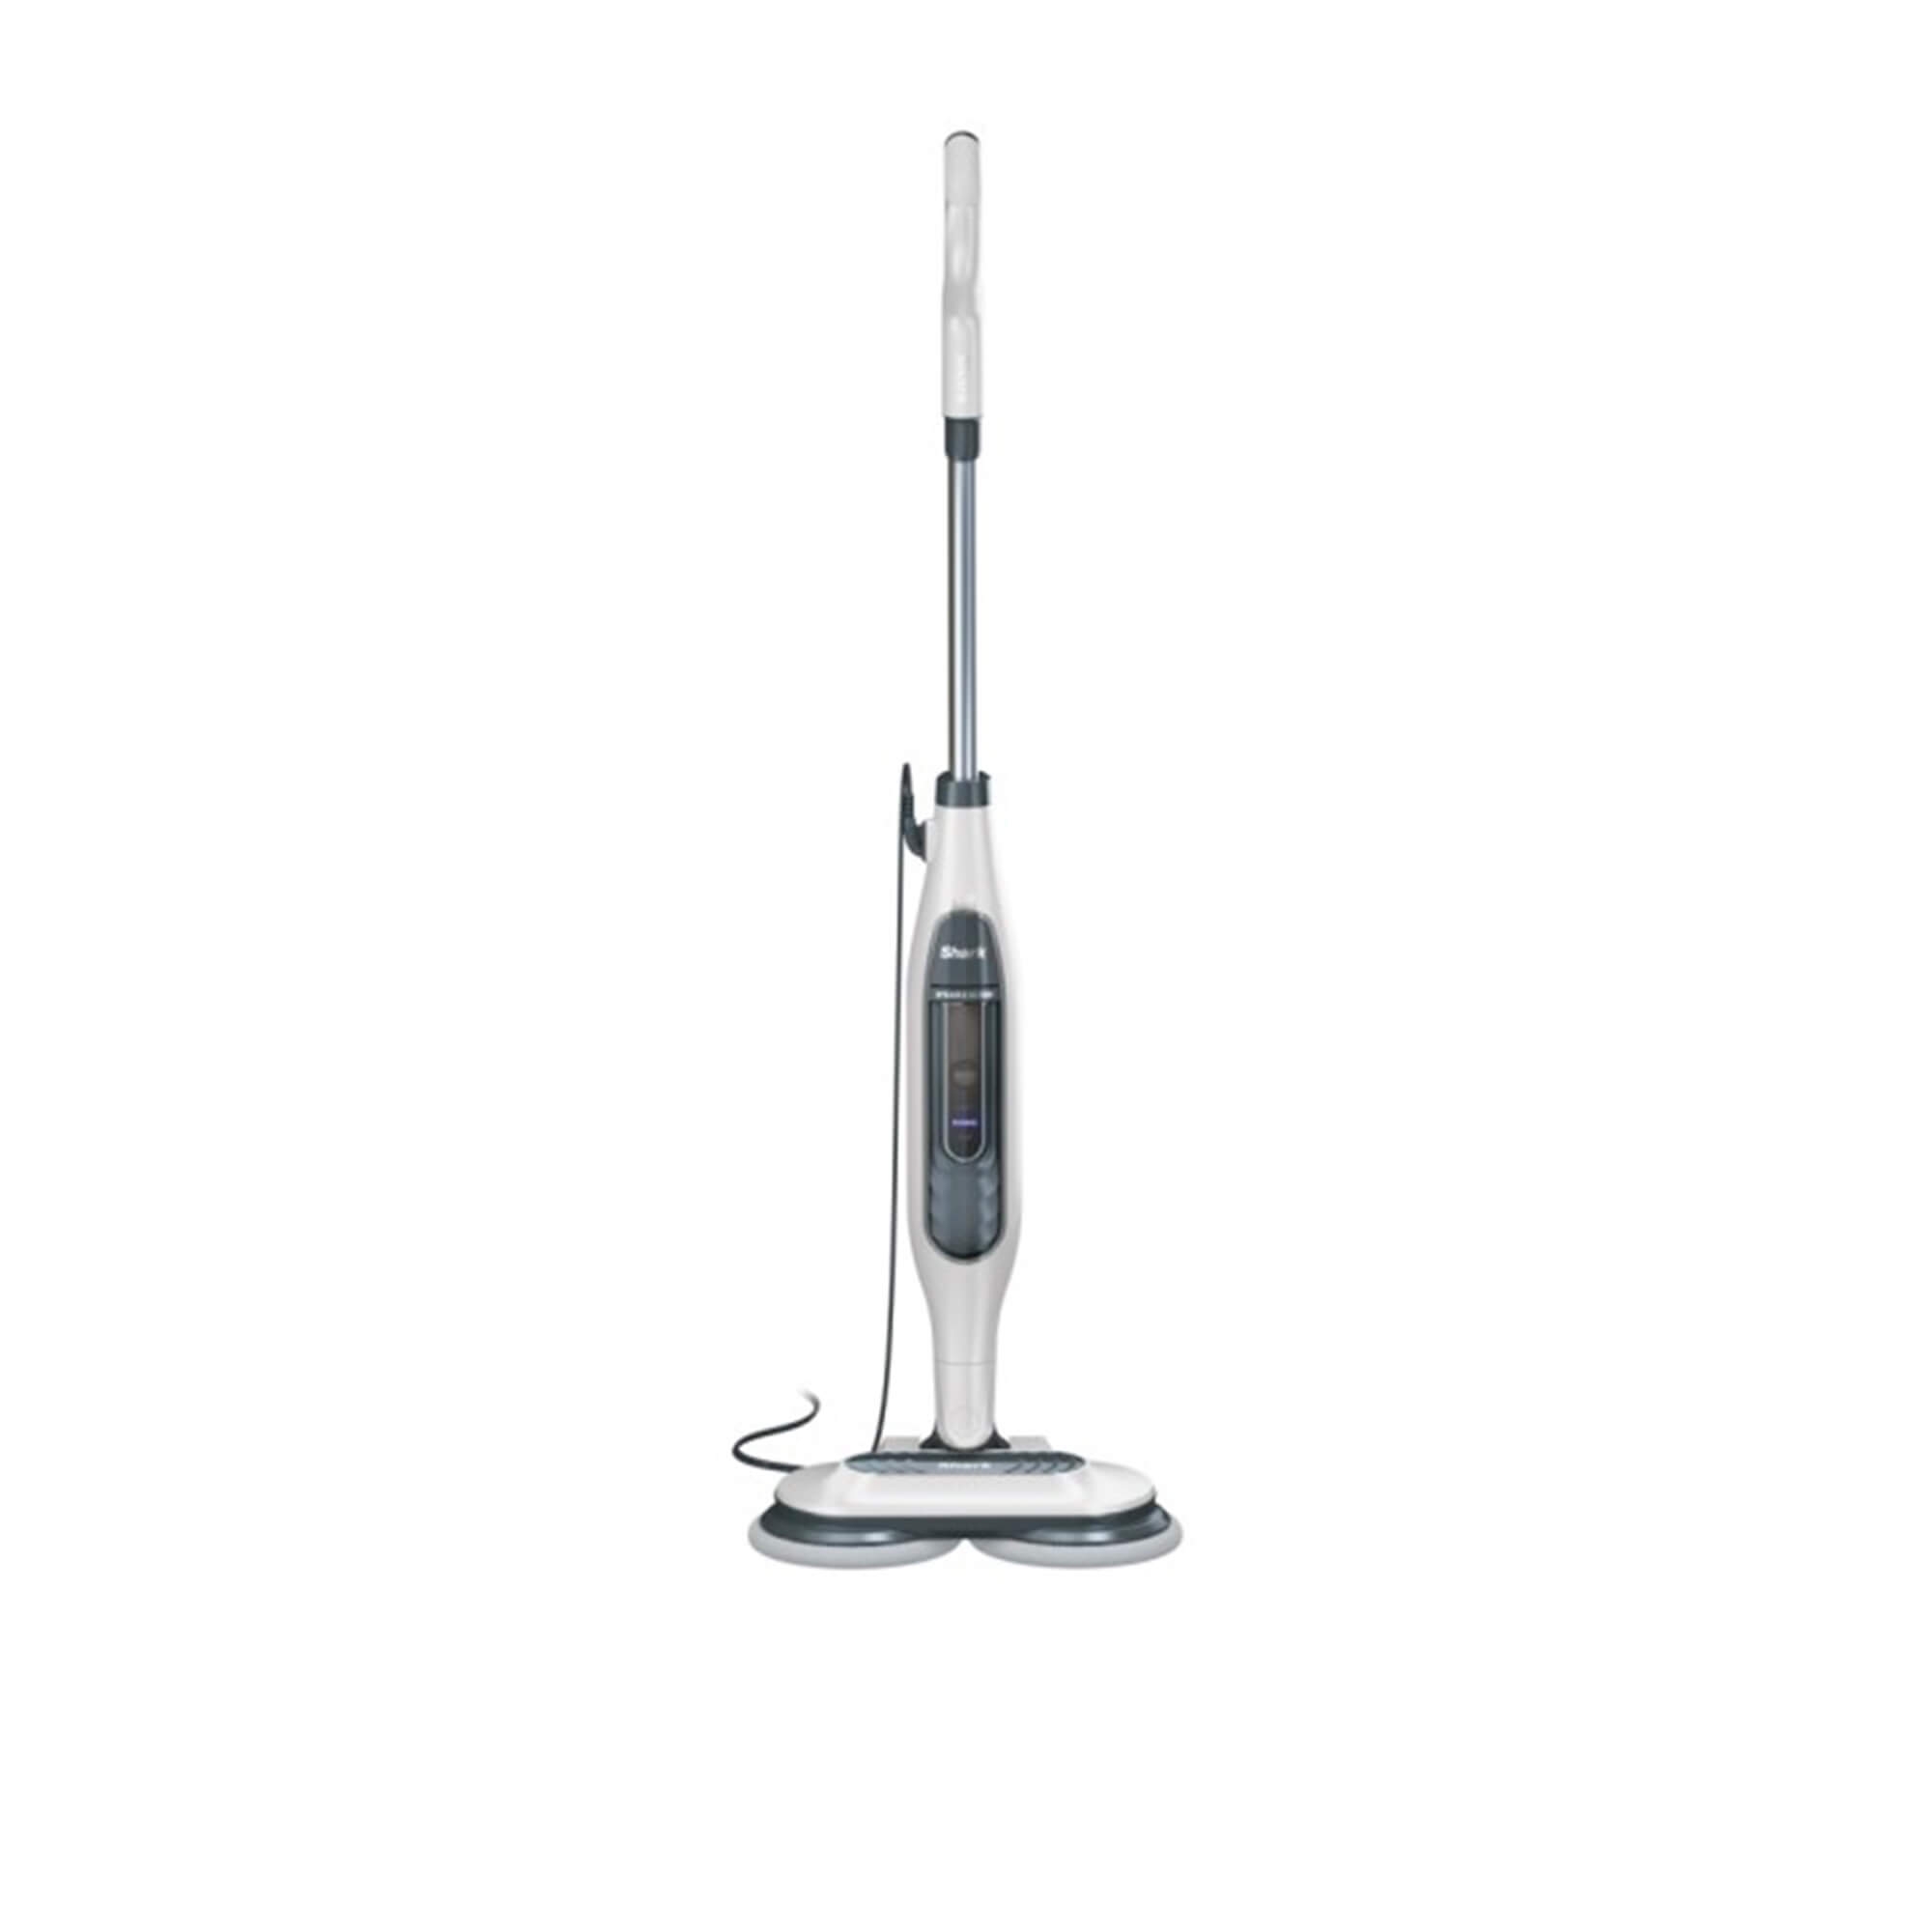 Shark S7001 Steam and Scrub Mop Image 1